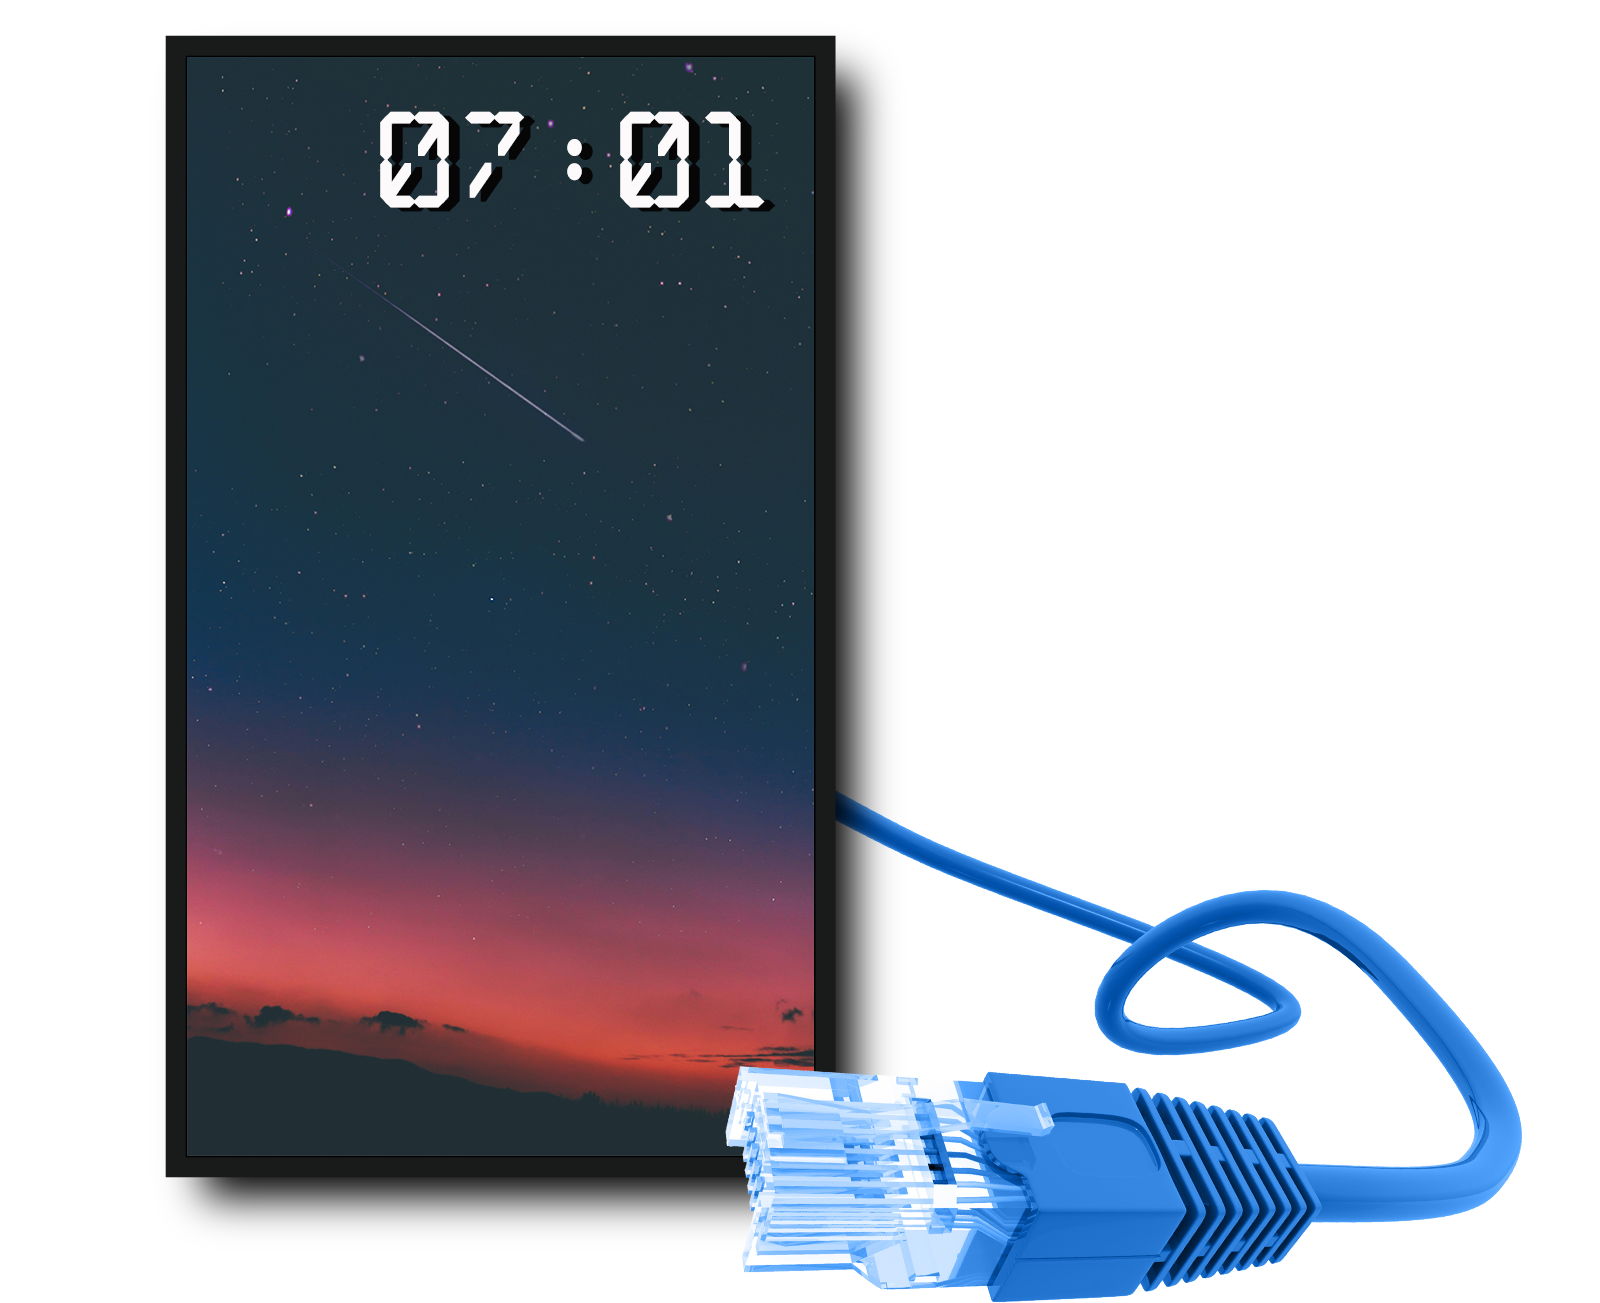 power over ethernet display with a sunset and a blue ethernet cable